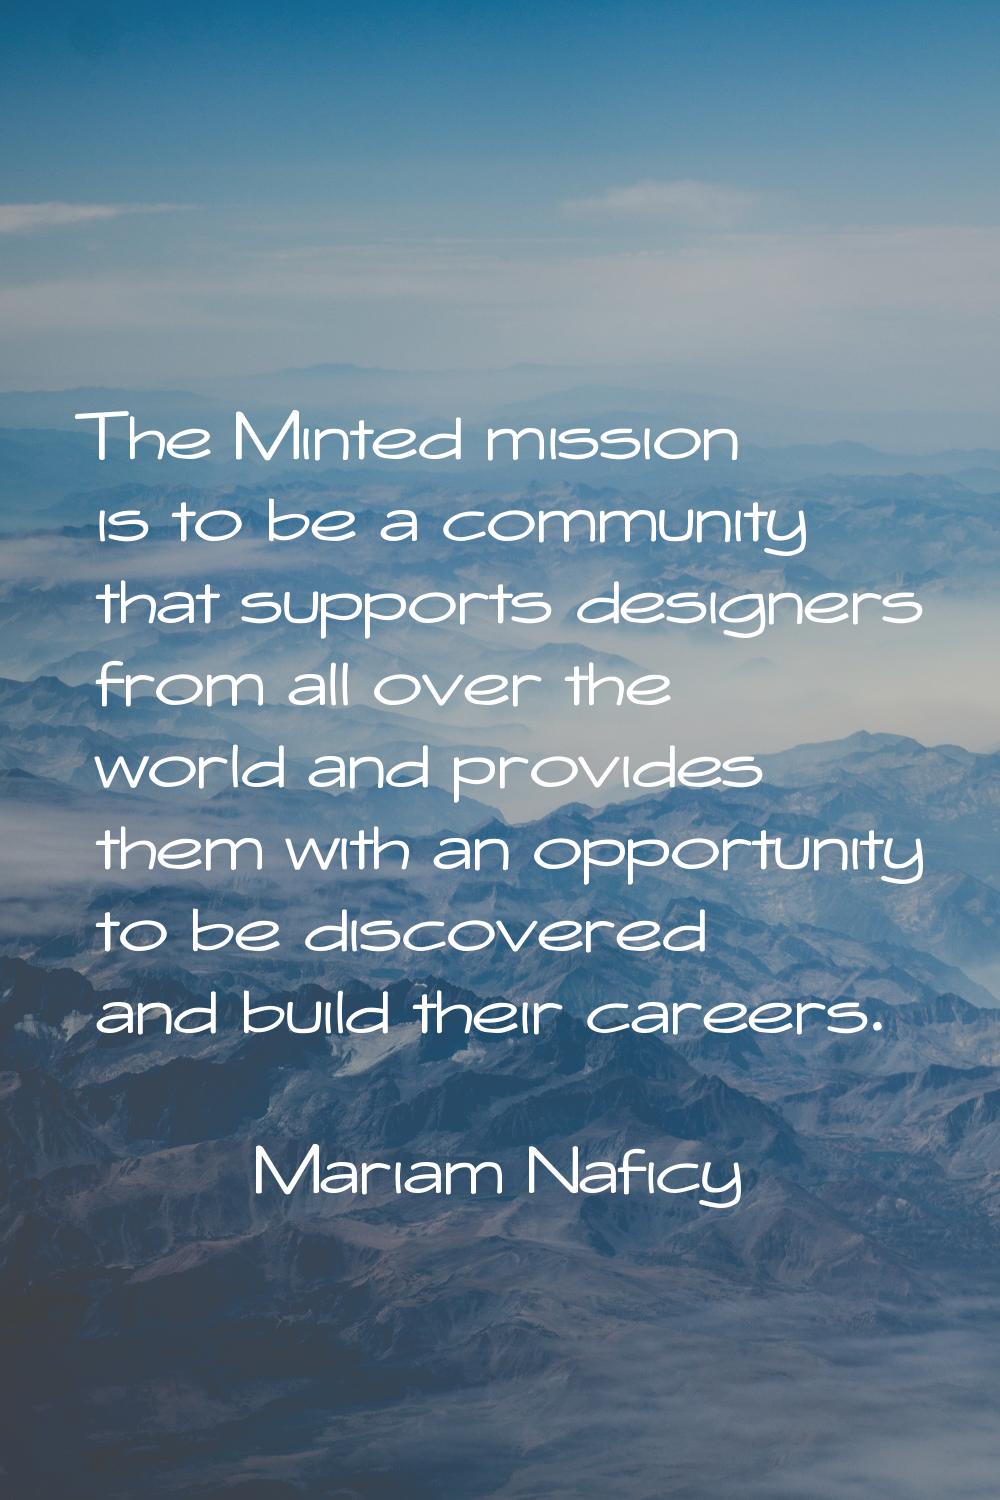 The Minted mission is to be a community that supports designers from all over the world and provide